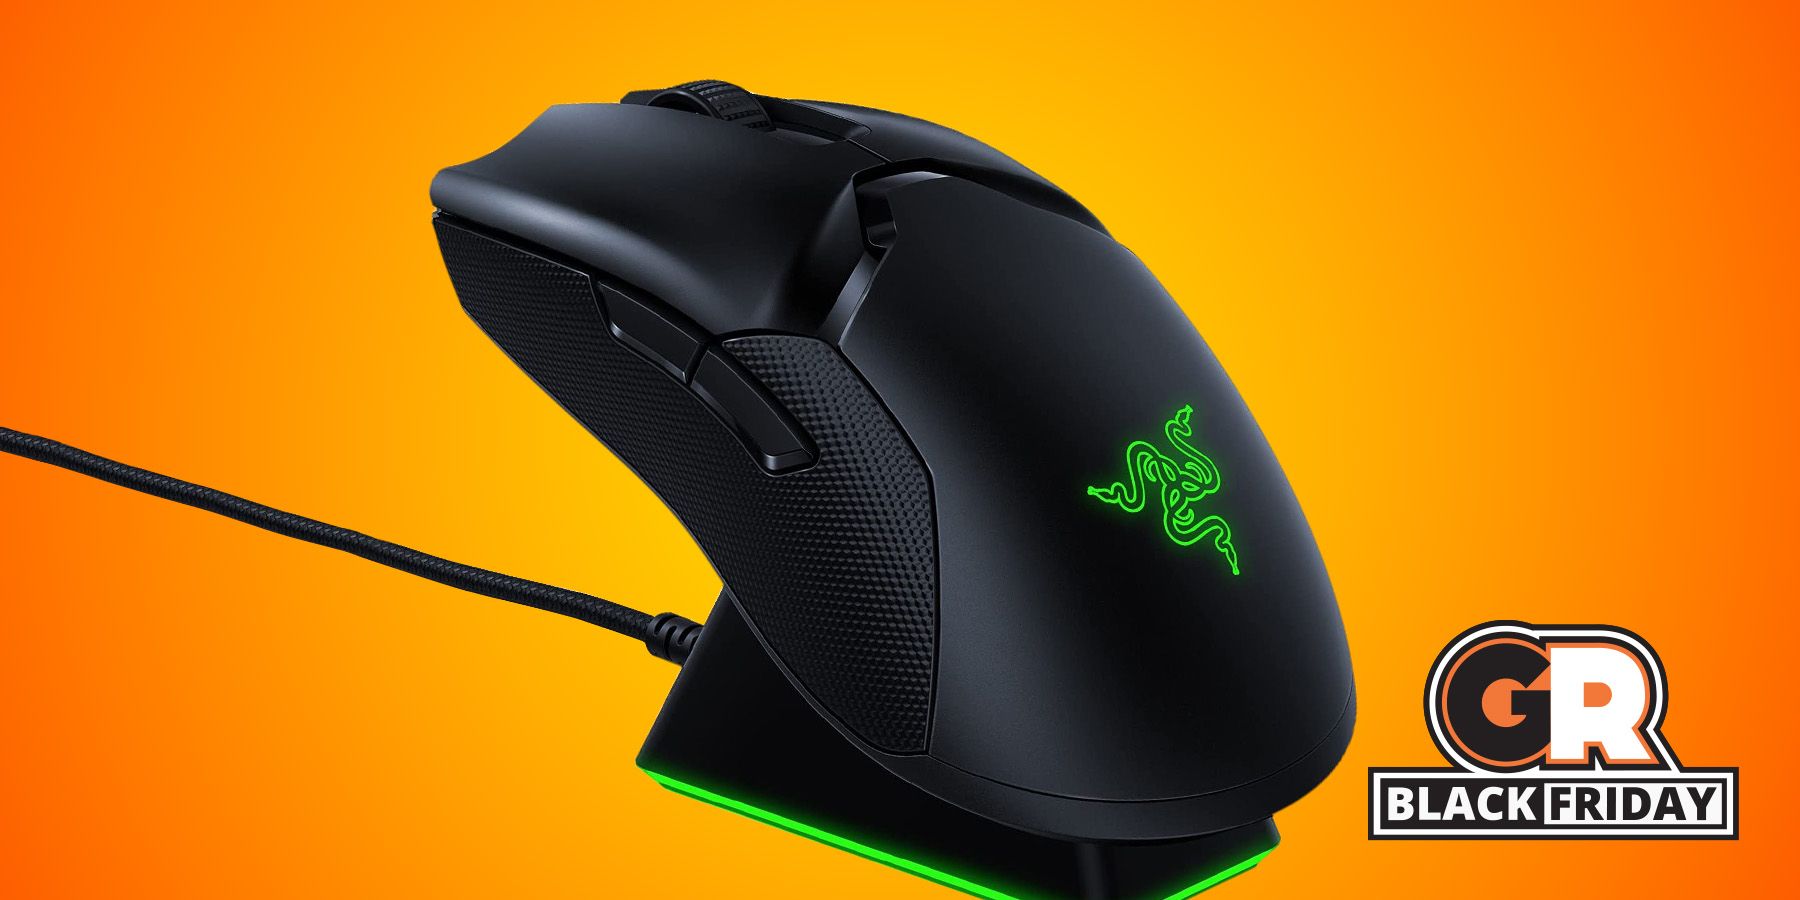 gaming mouse black friday discount